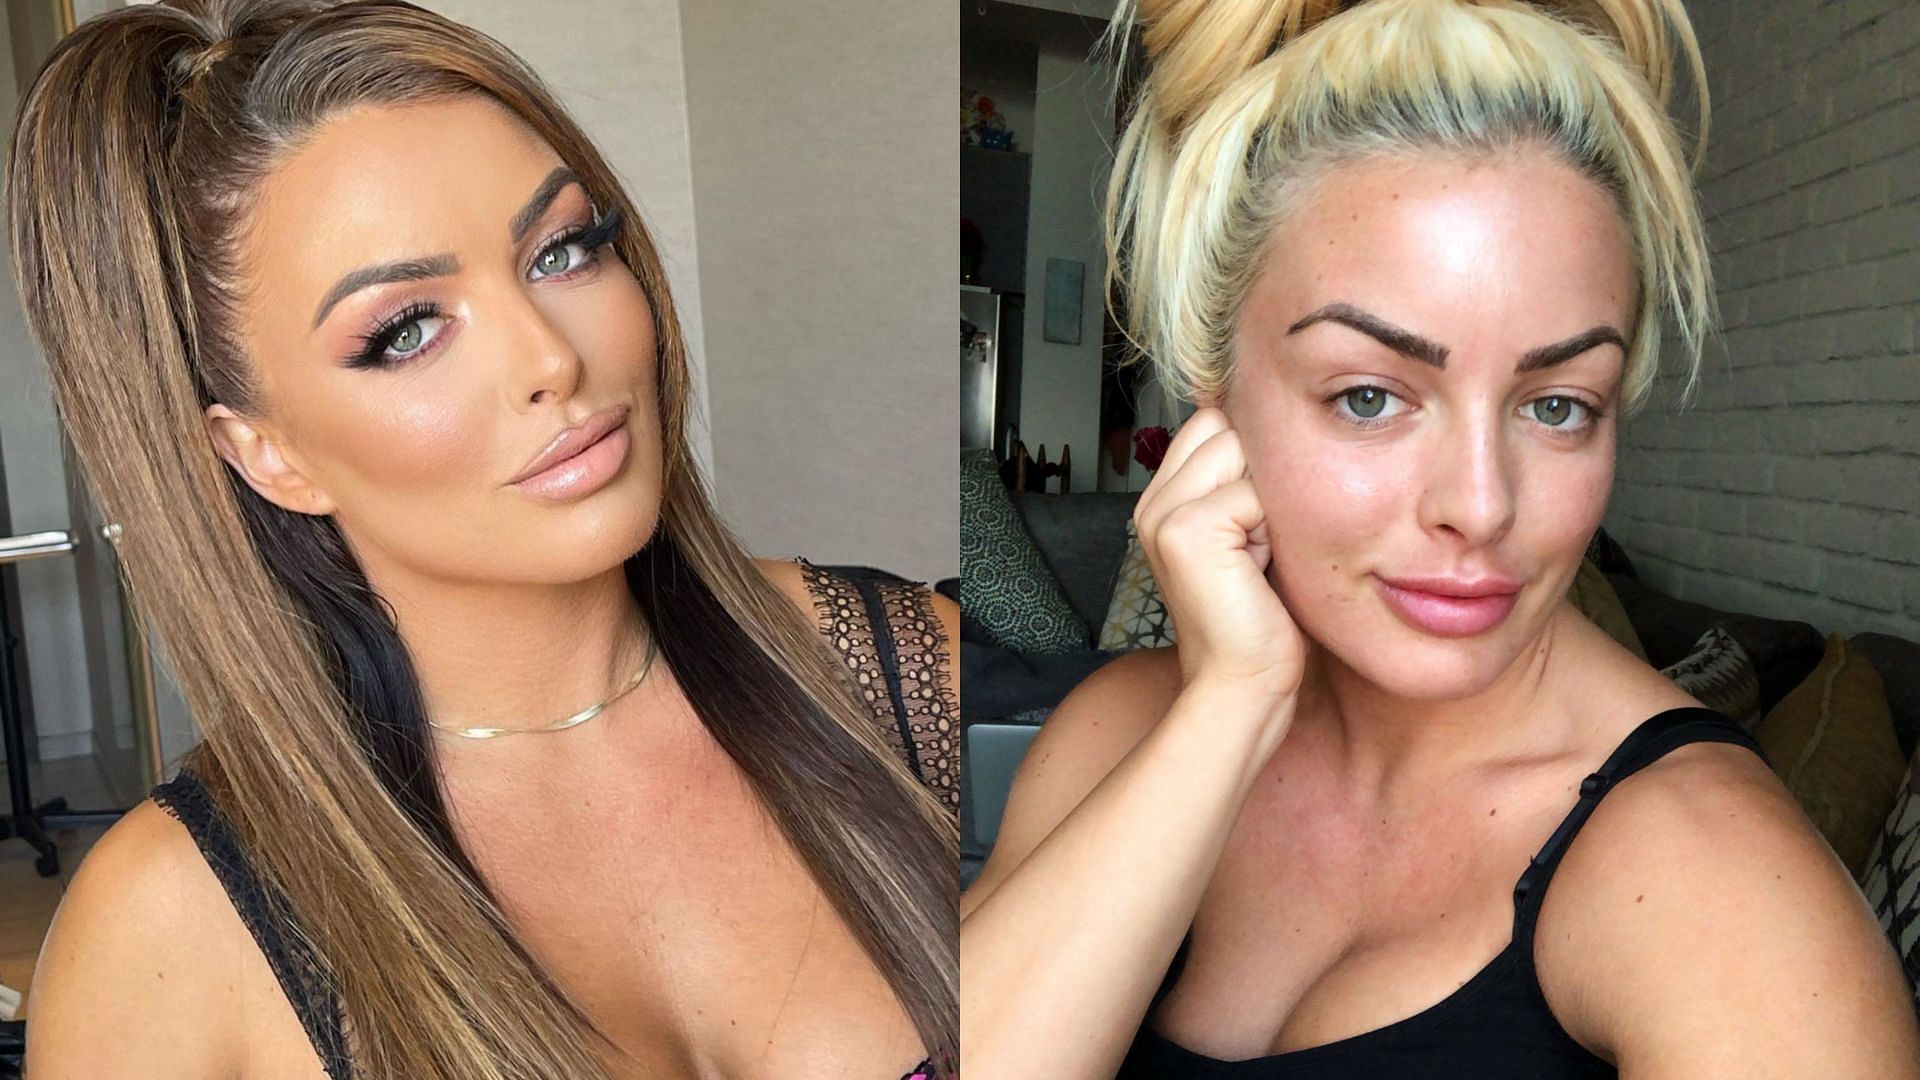 Mandy Rose with makeup (left) and without makeup (right)